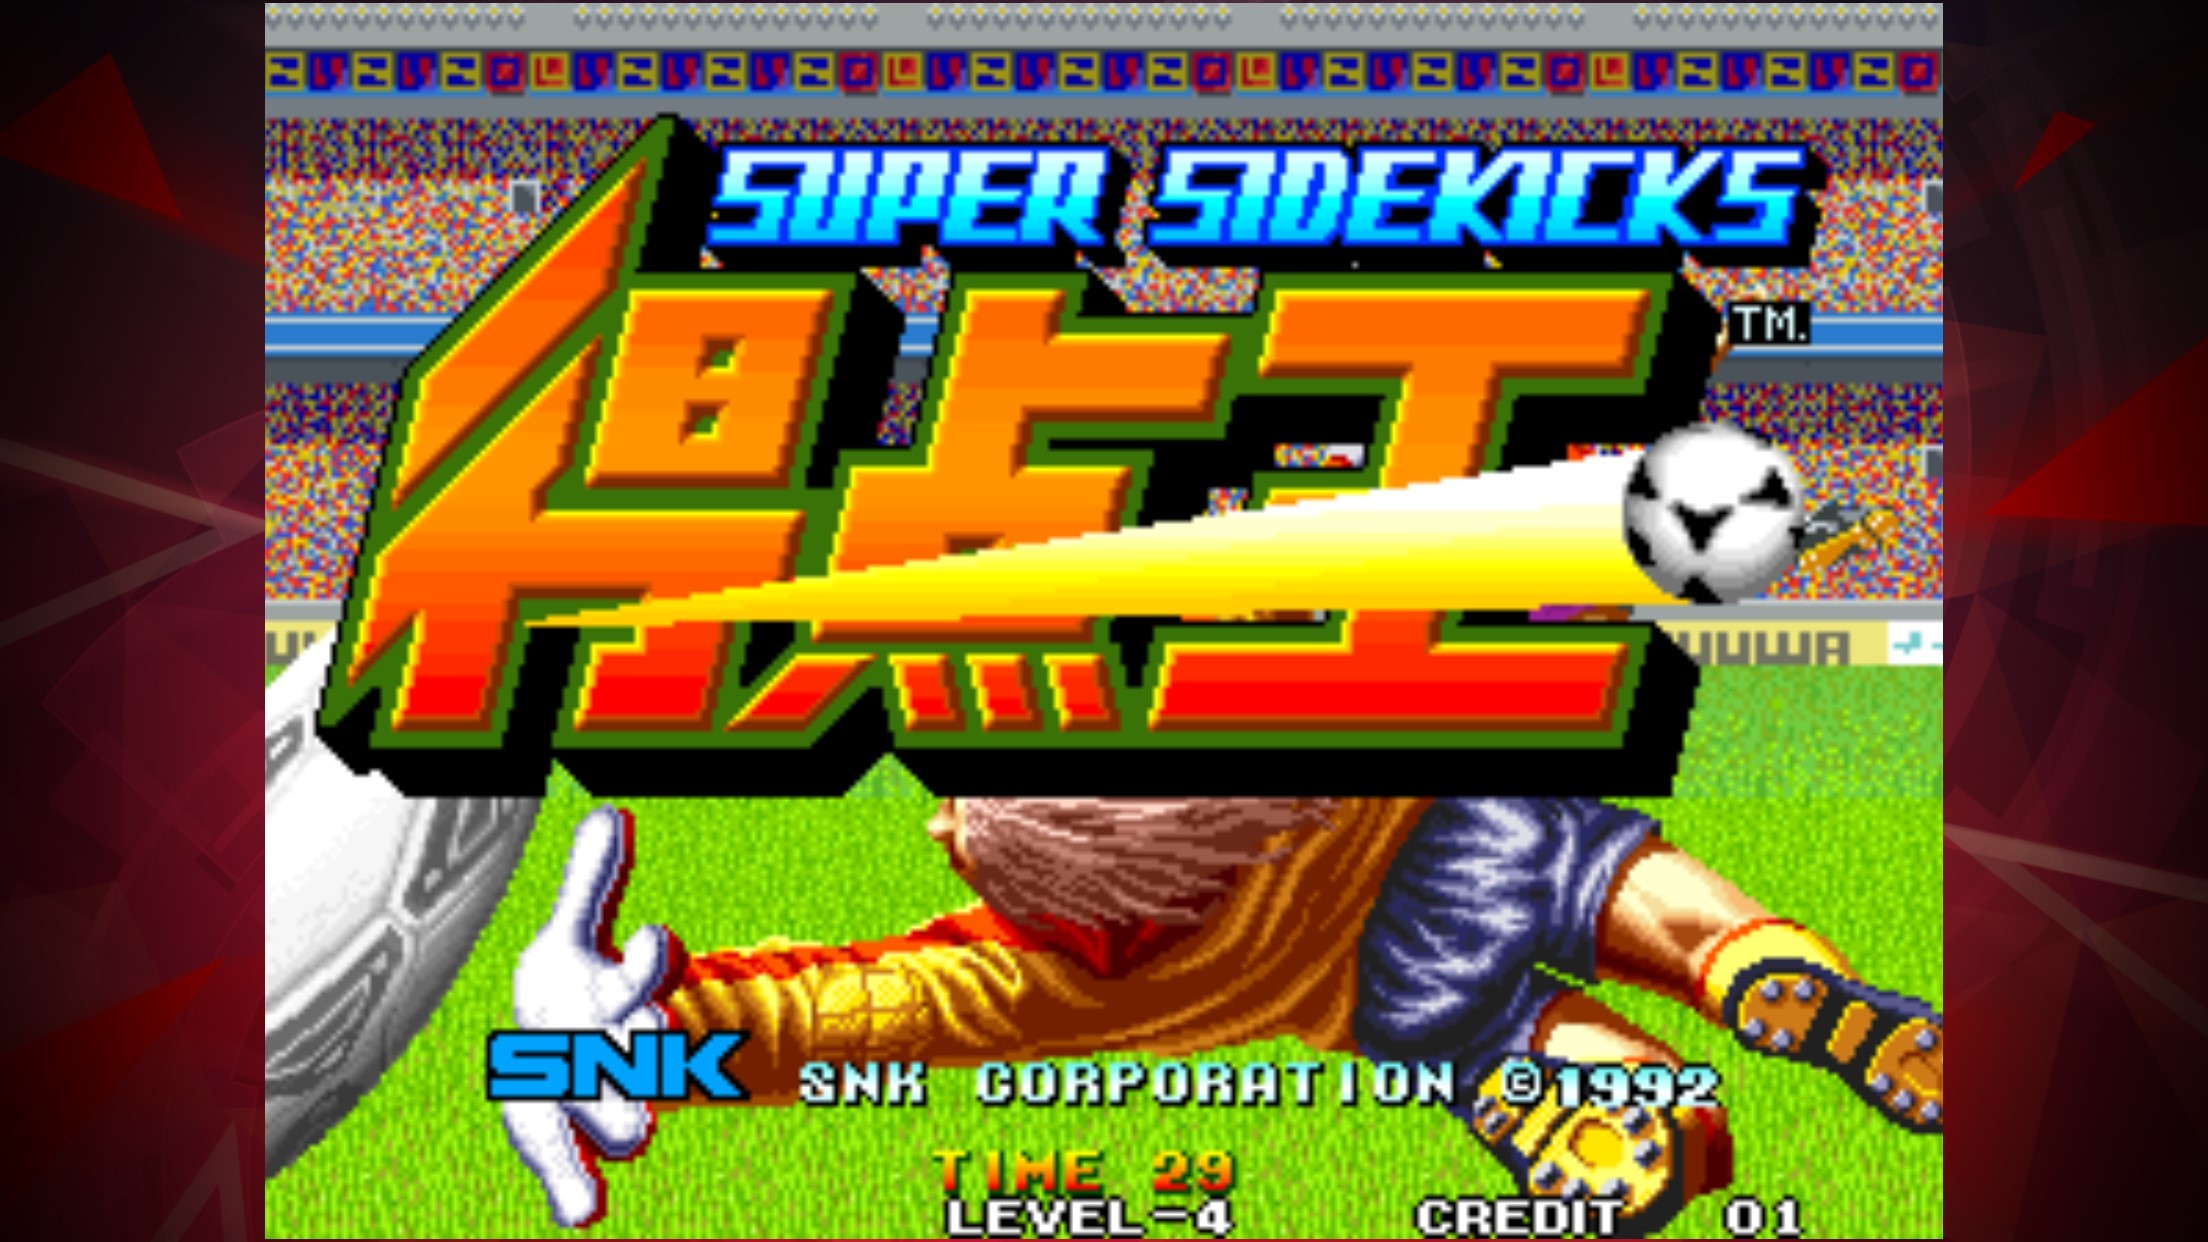  (C)SNK CORPORATION ALL RIGHTS RESERVED. Arcade Archives Series Produced by HAMSTER Co.